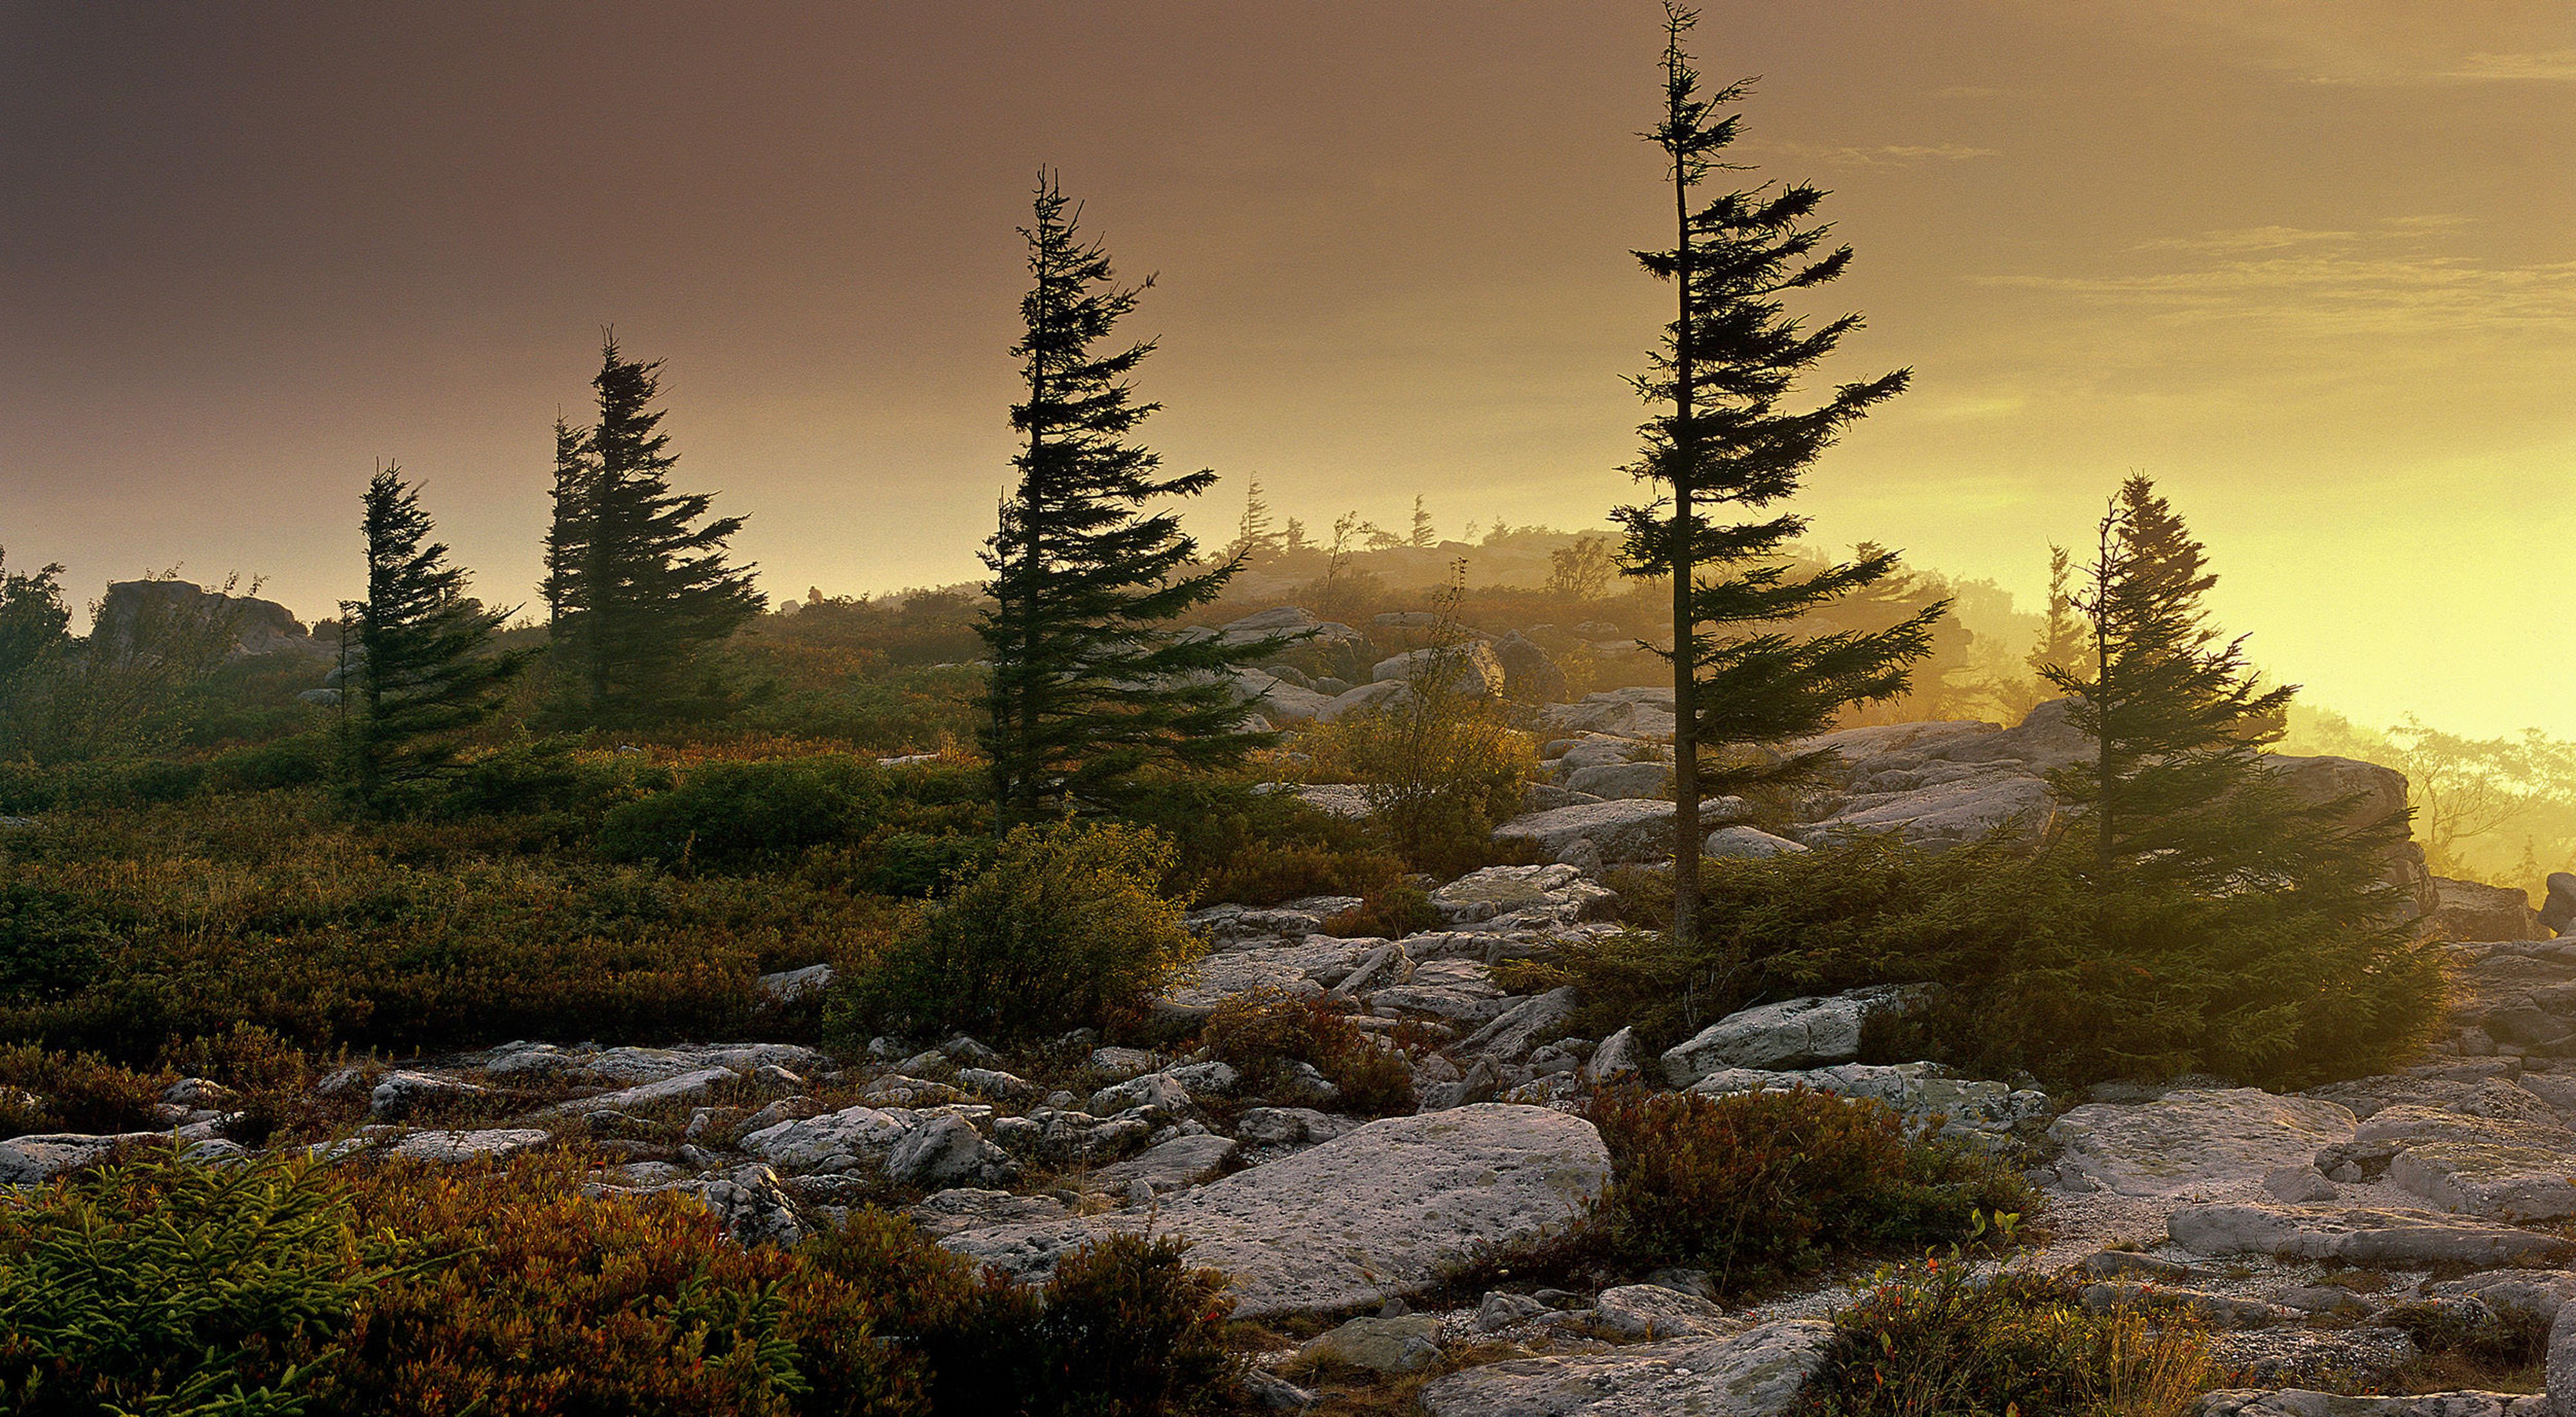 Sunrise shows in the misty air behind spruce trees and a rocky landscape.